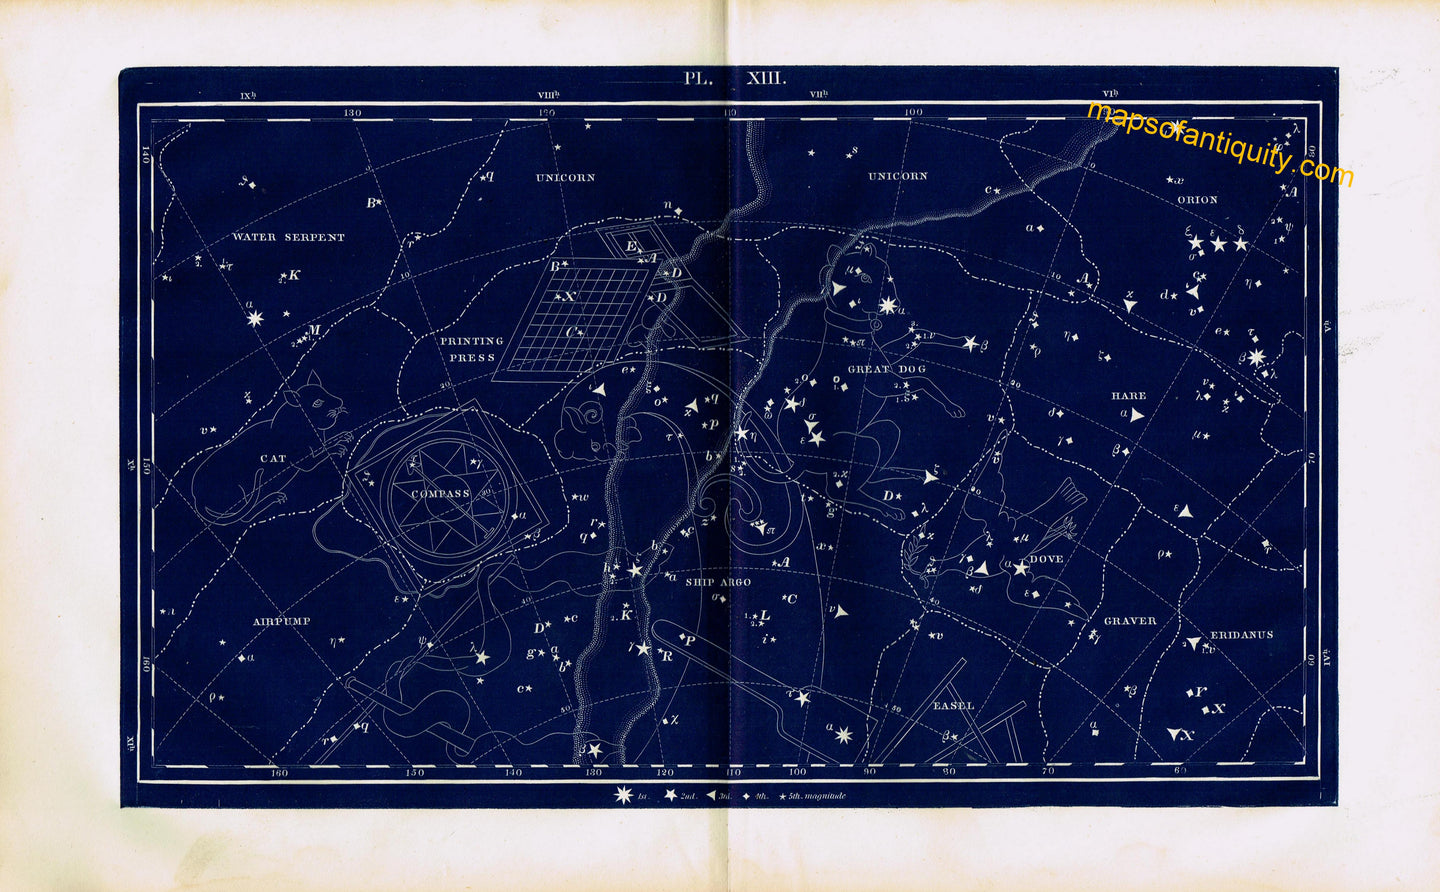 Antique-Printed-Color-Celestial-Map-Plate-XIII-with-the-Cat-and-the-Great-Dog-Constellations-**********-Celestial--1846-Butler-Maps-Of-Antiquity